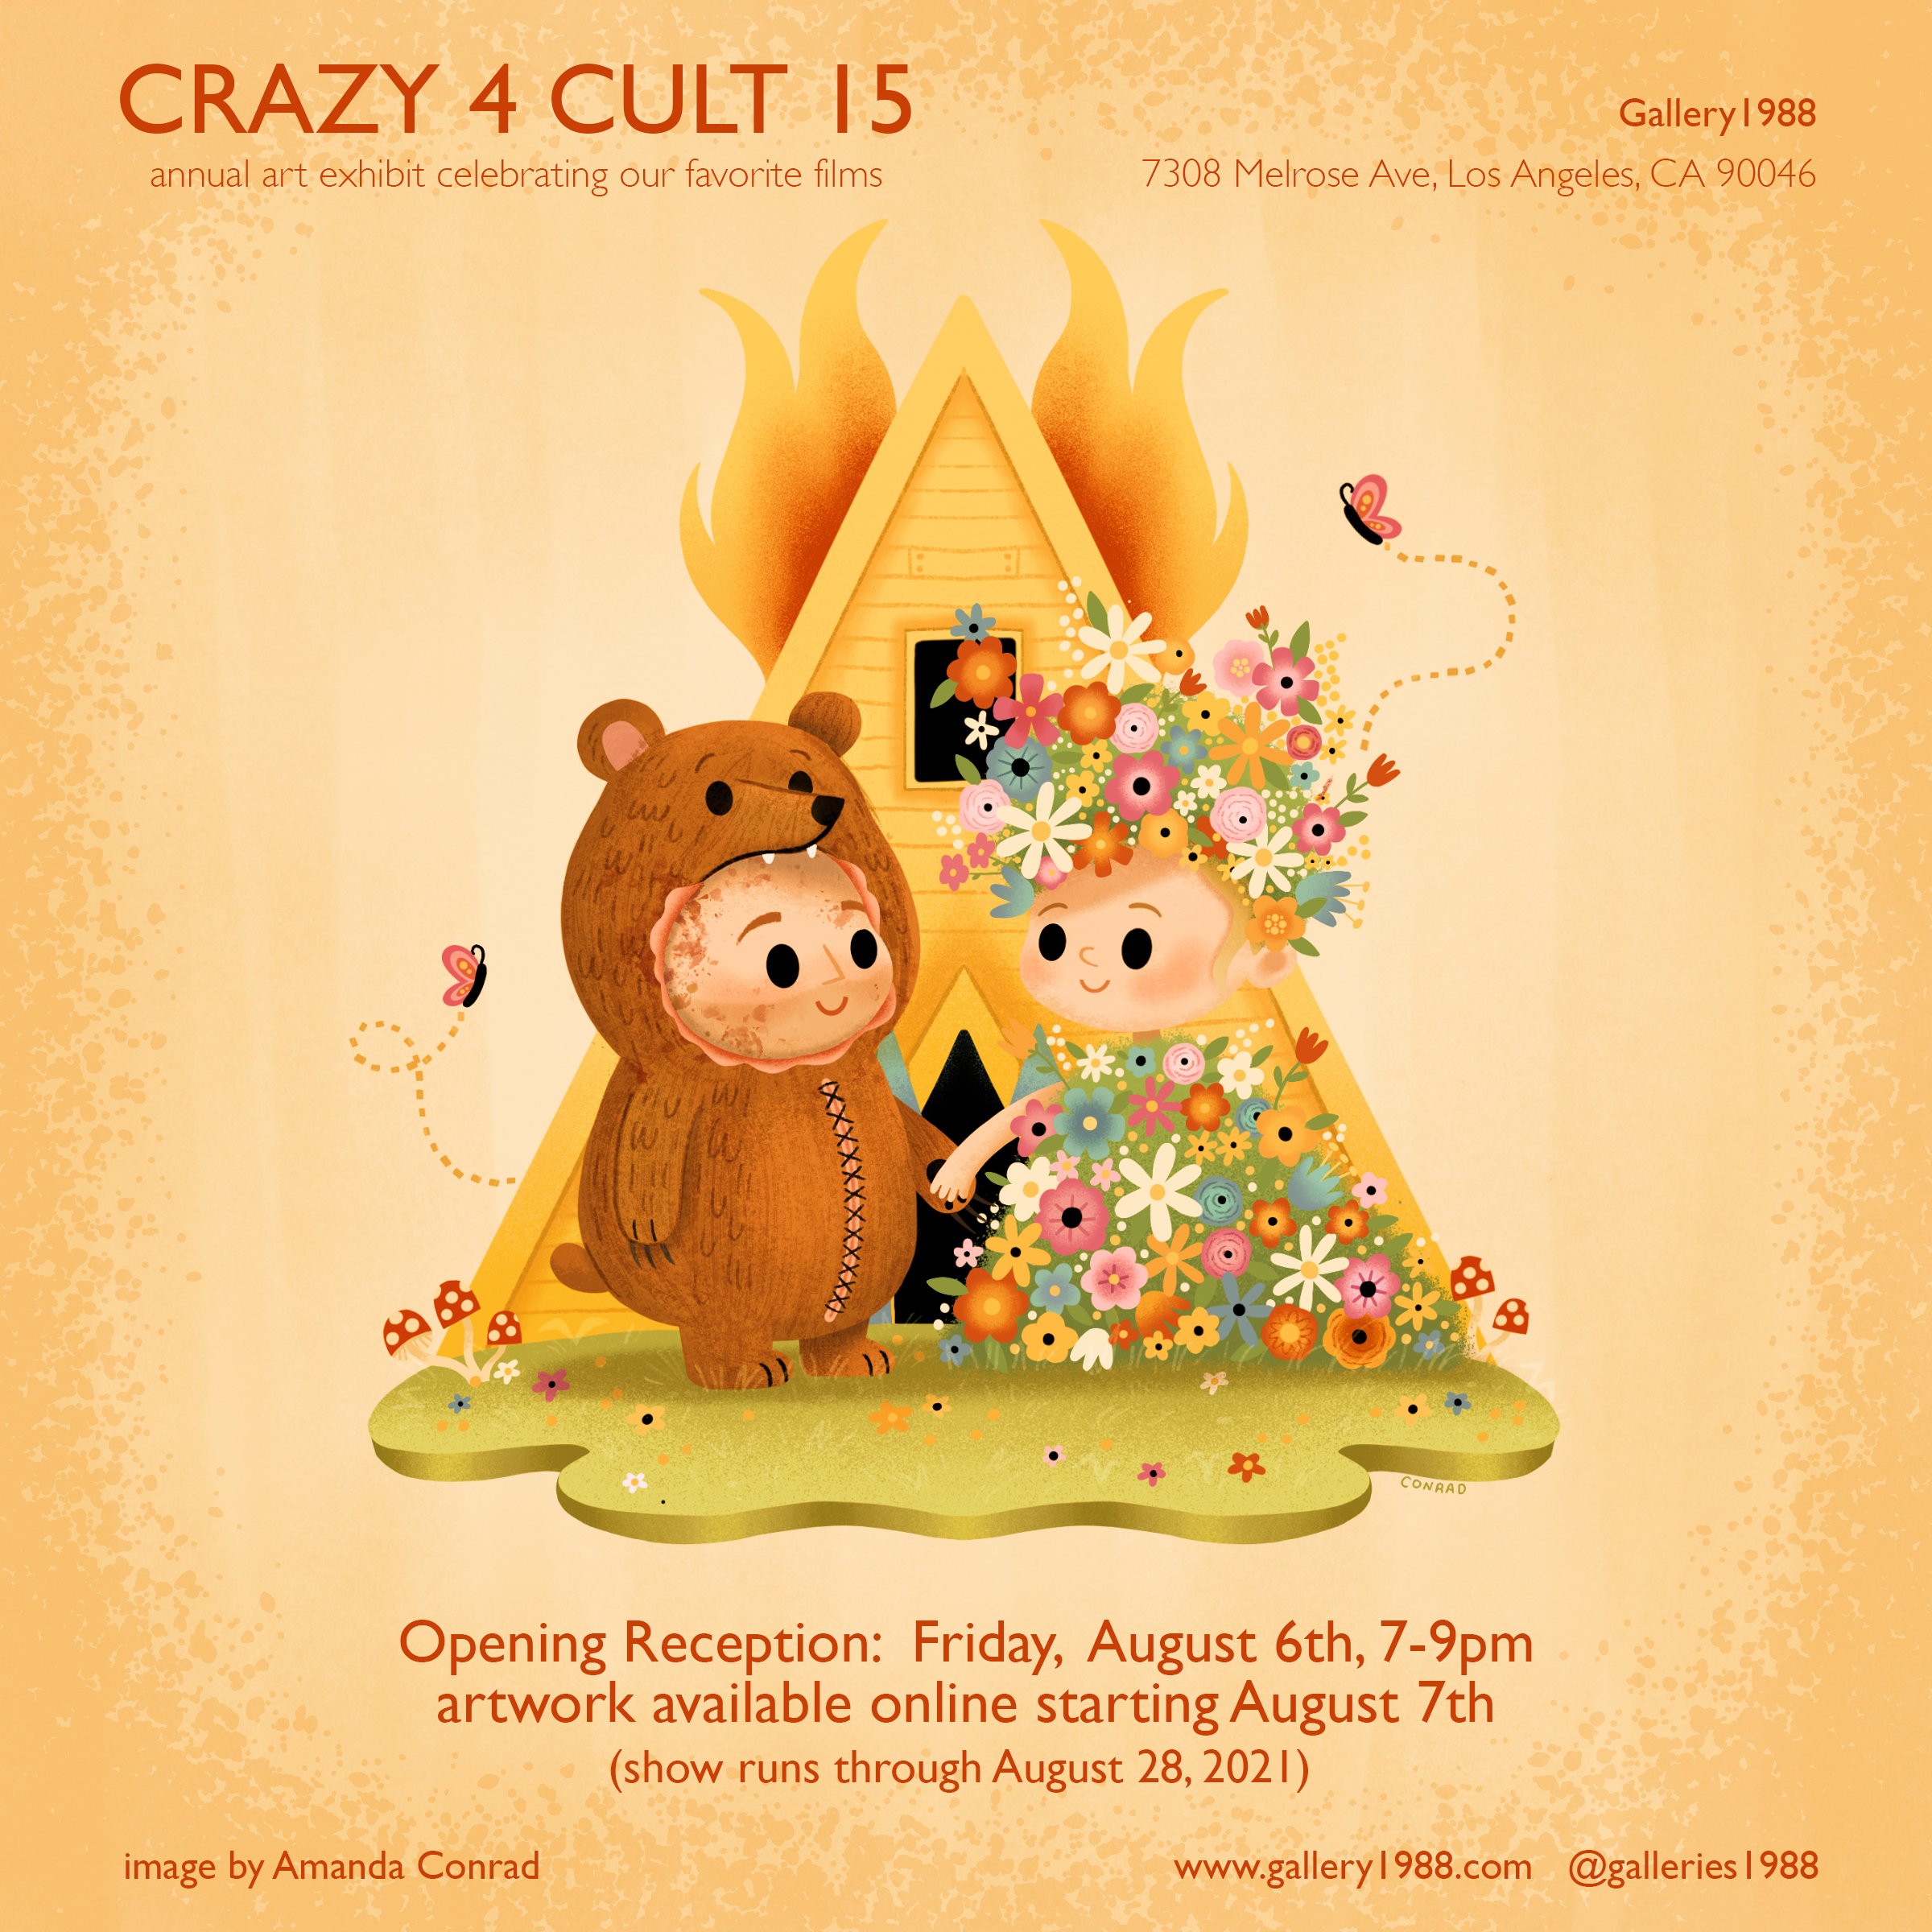 Crazy 4 Cult 15 opens this Friday